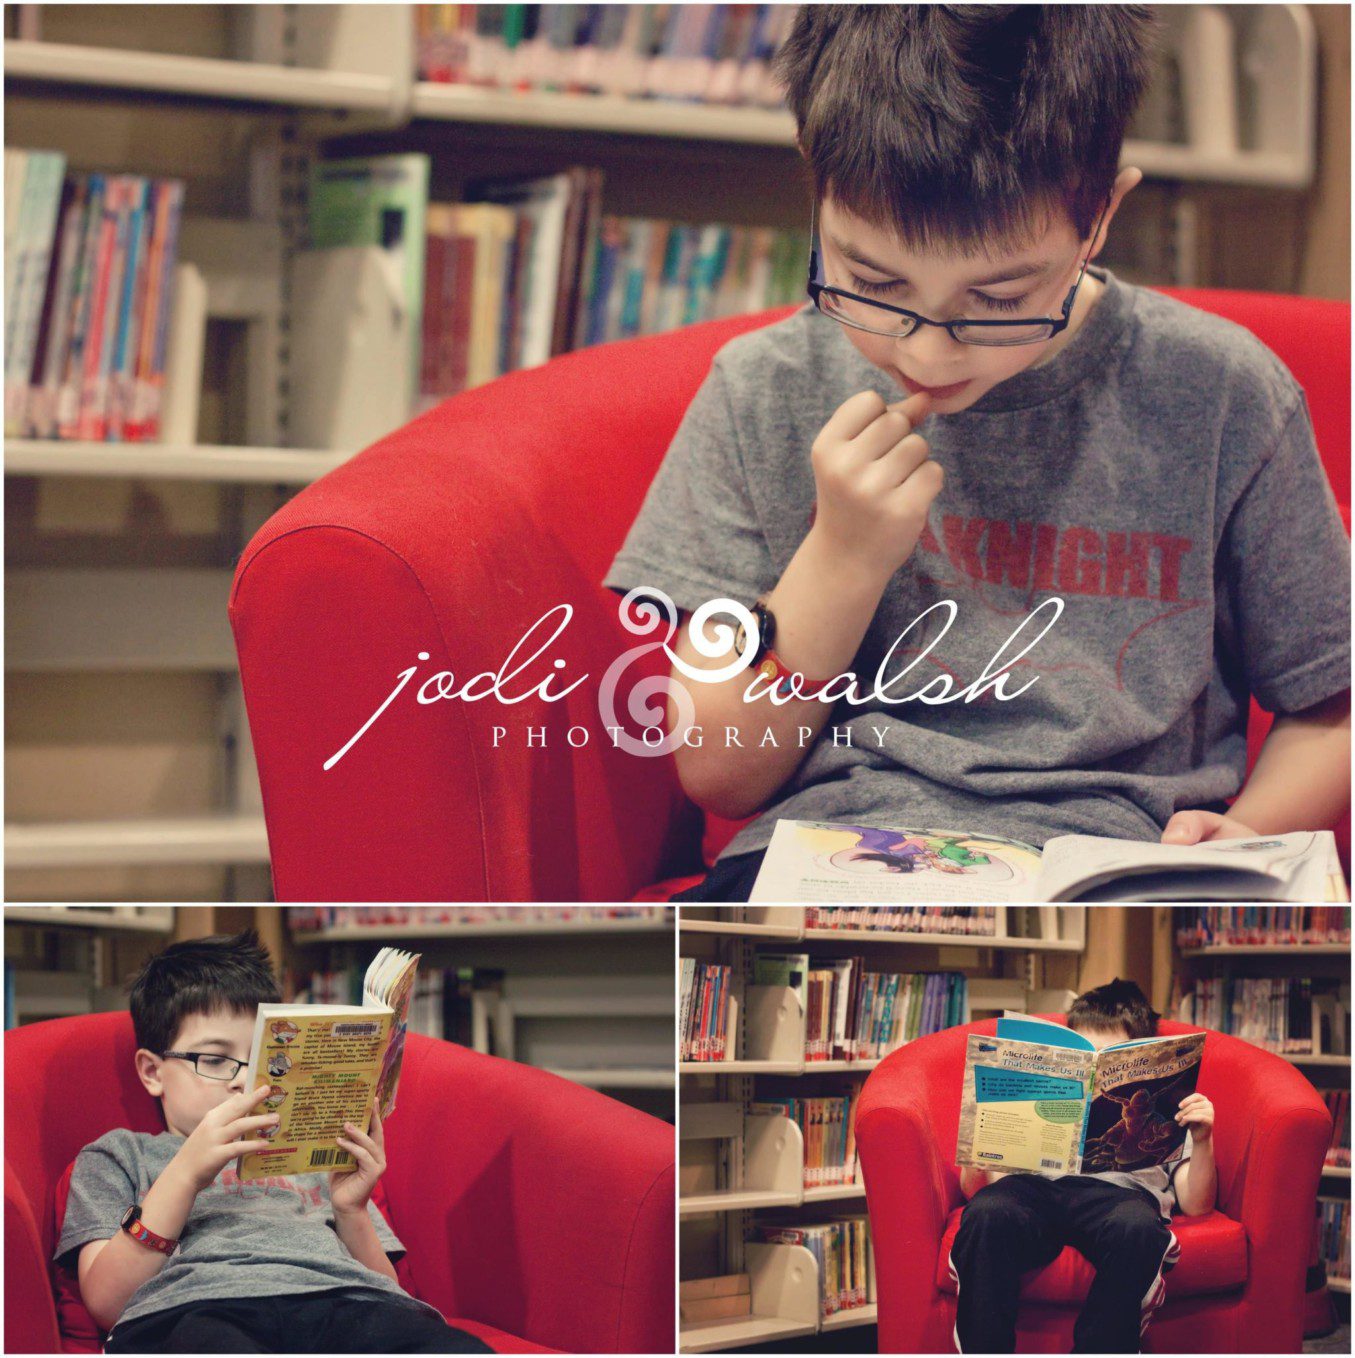 image of a boy sitting in a red chair at a library, reading